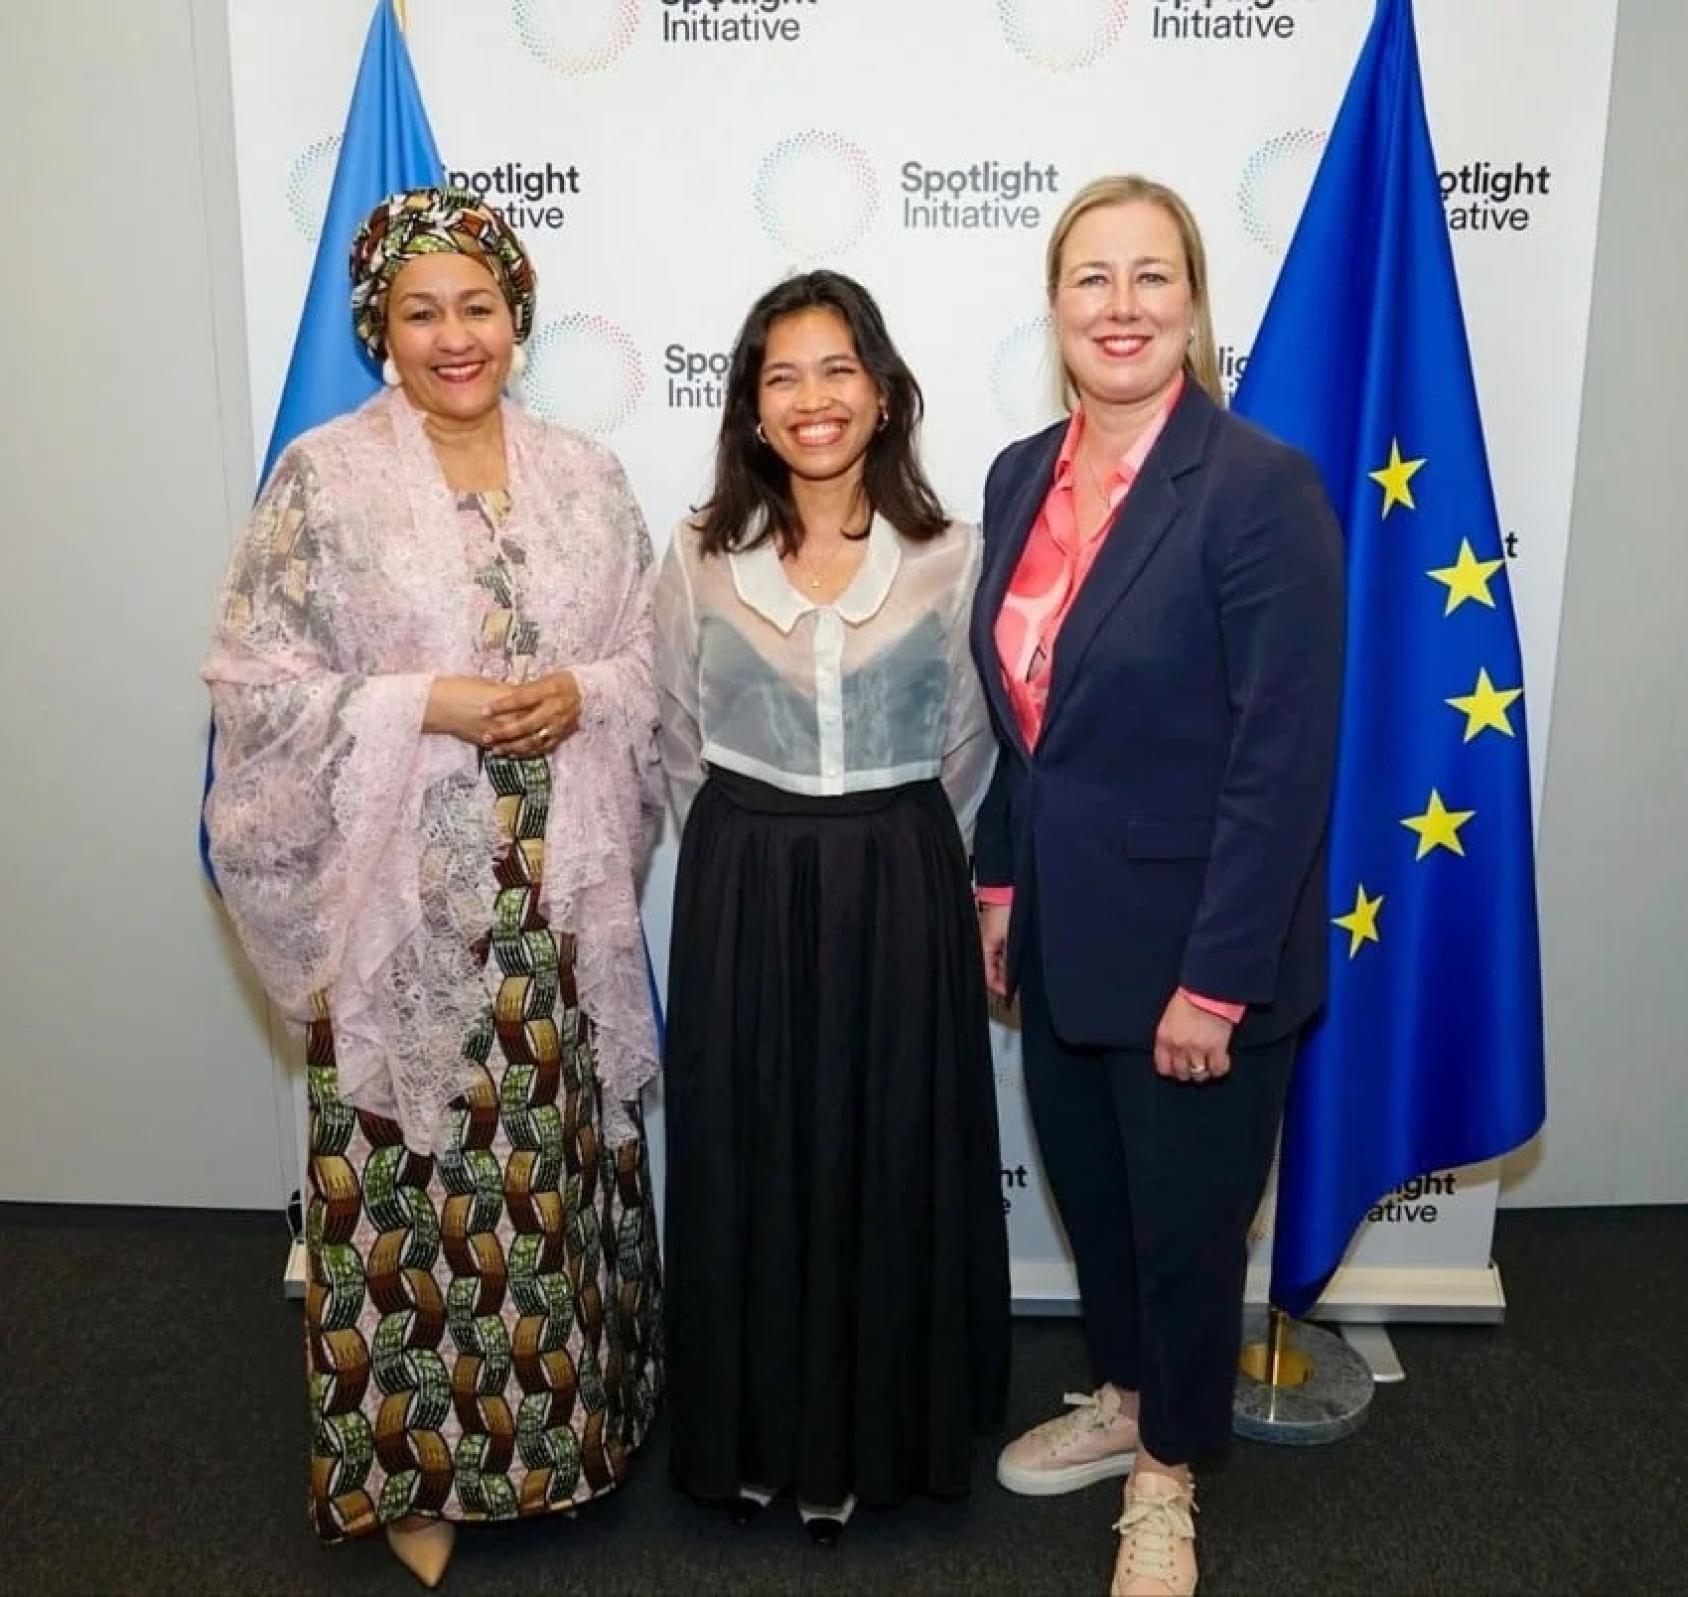 Three women stand in front of a white banner with the logo of the spotlight initiative printed on it. On either side of the banner you see the EU flag and the UN flag